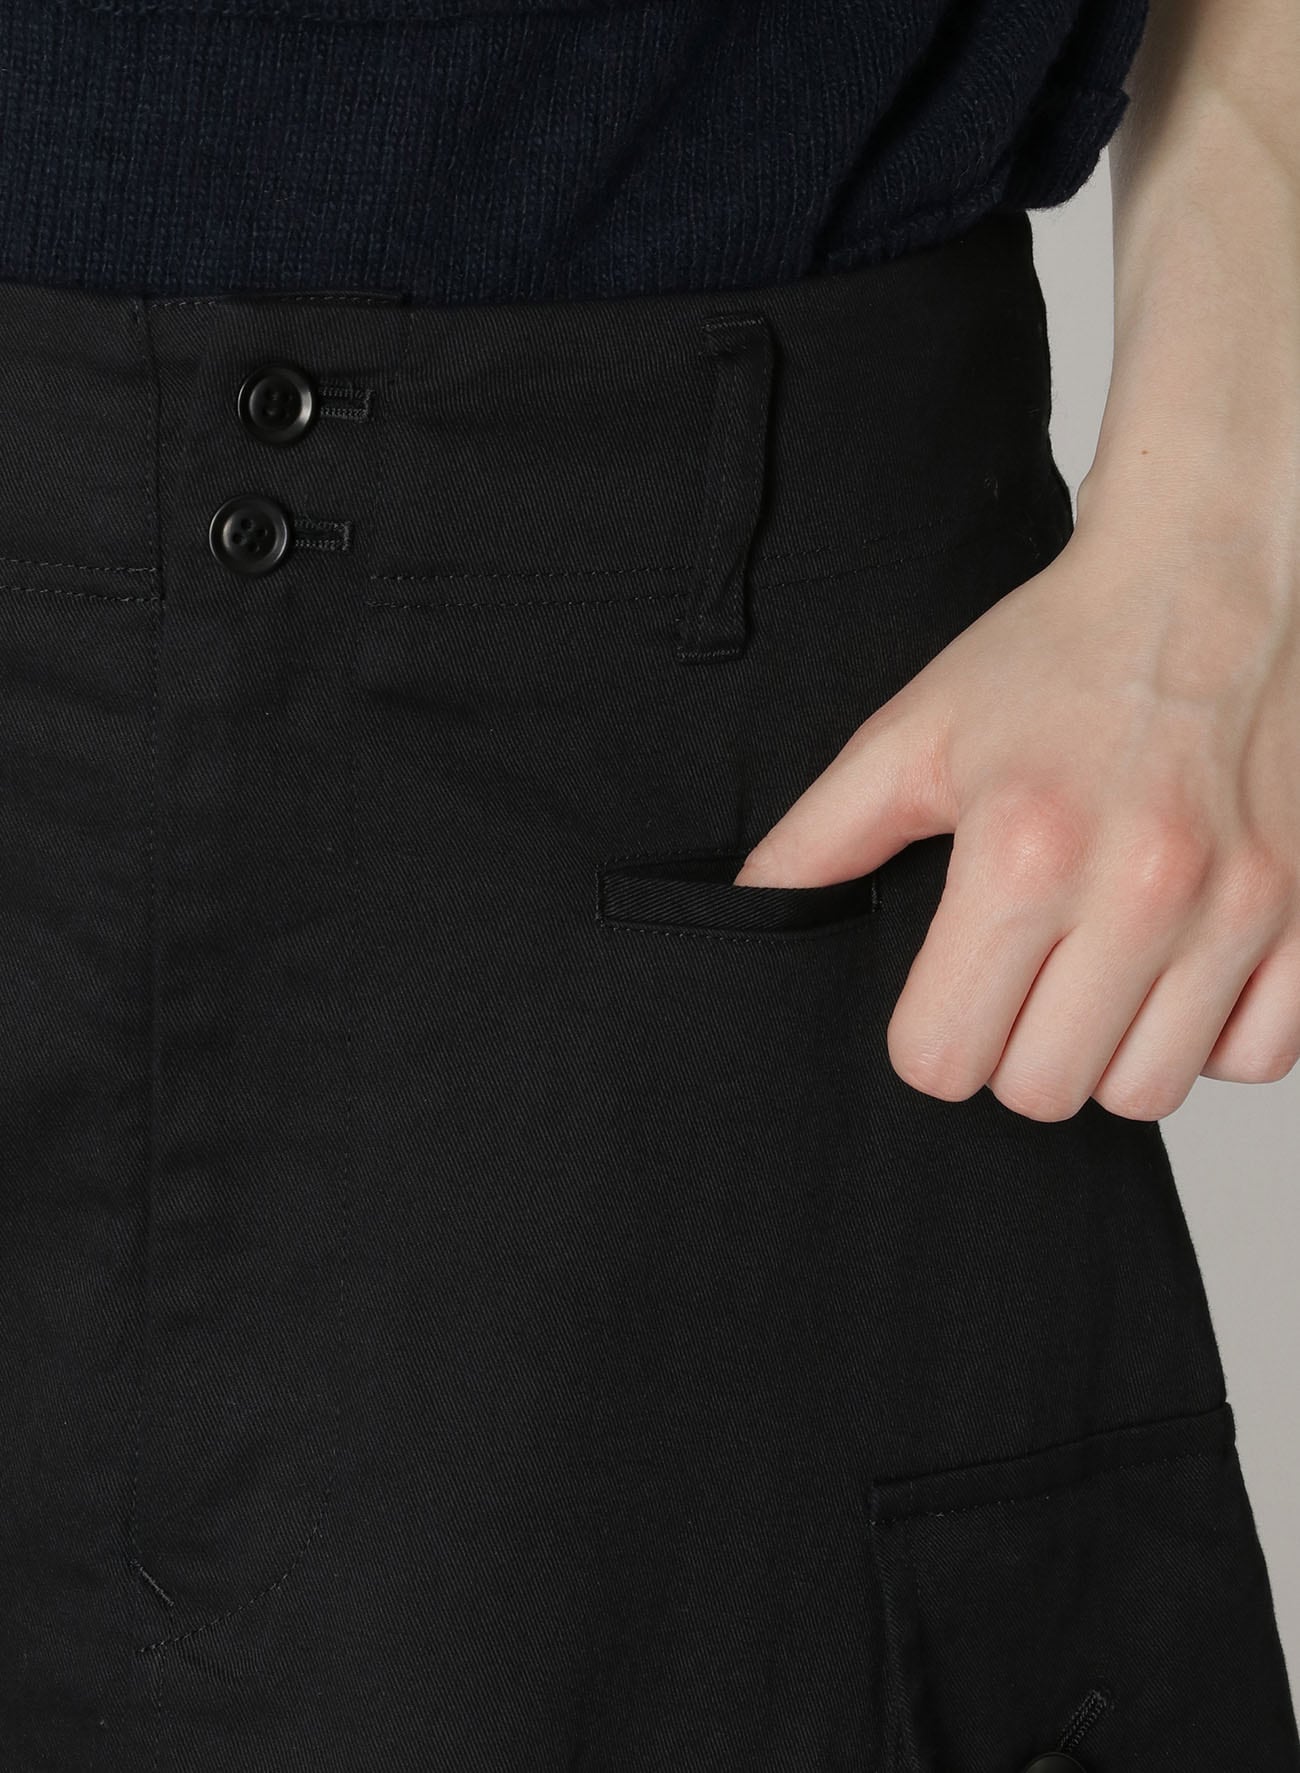 [Y's BORN PRODUCT] COTTON TWILL CARGO PANTS-STYLE SKIRT